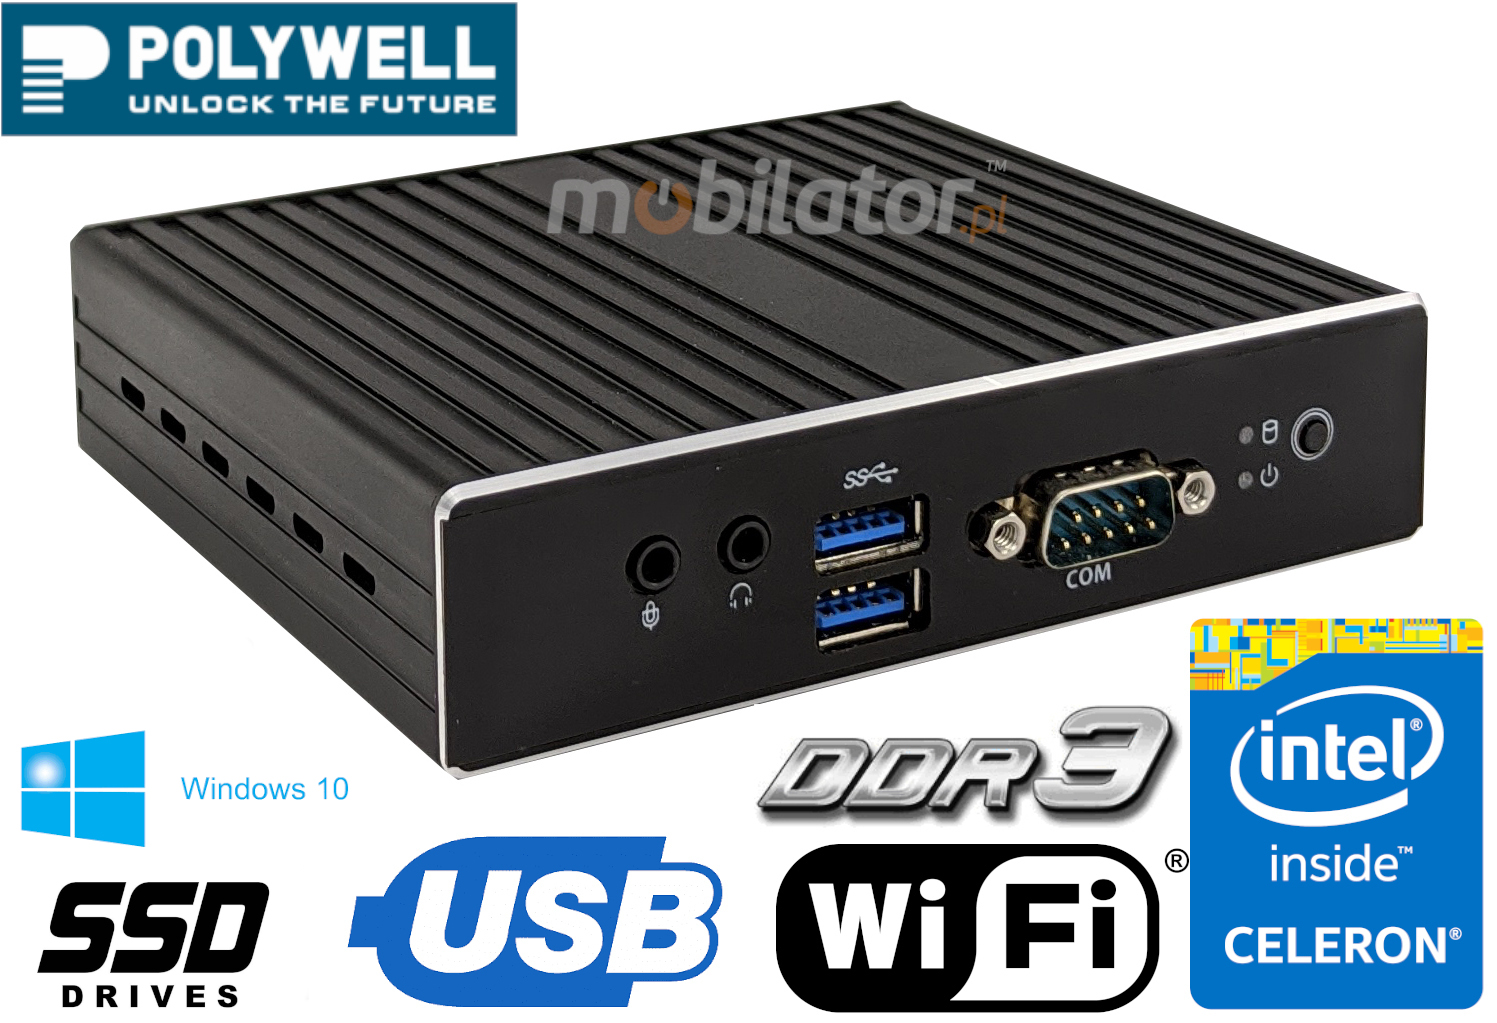 Polywell-Nano-N3350D  small reliable fast and efficient mini pc